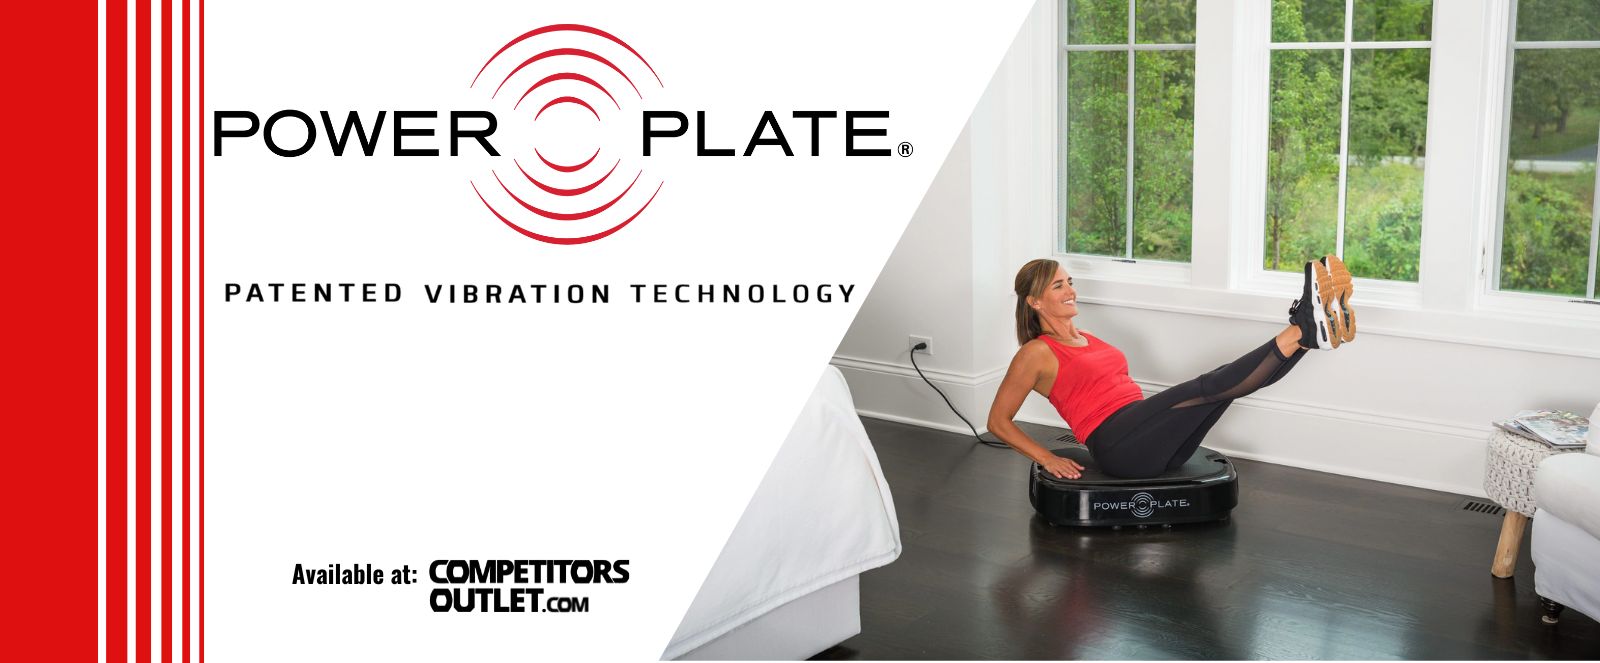 Power Plate: The Perfect Solution for Menopause Symptoms